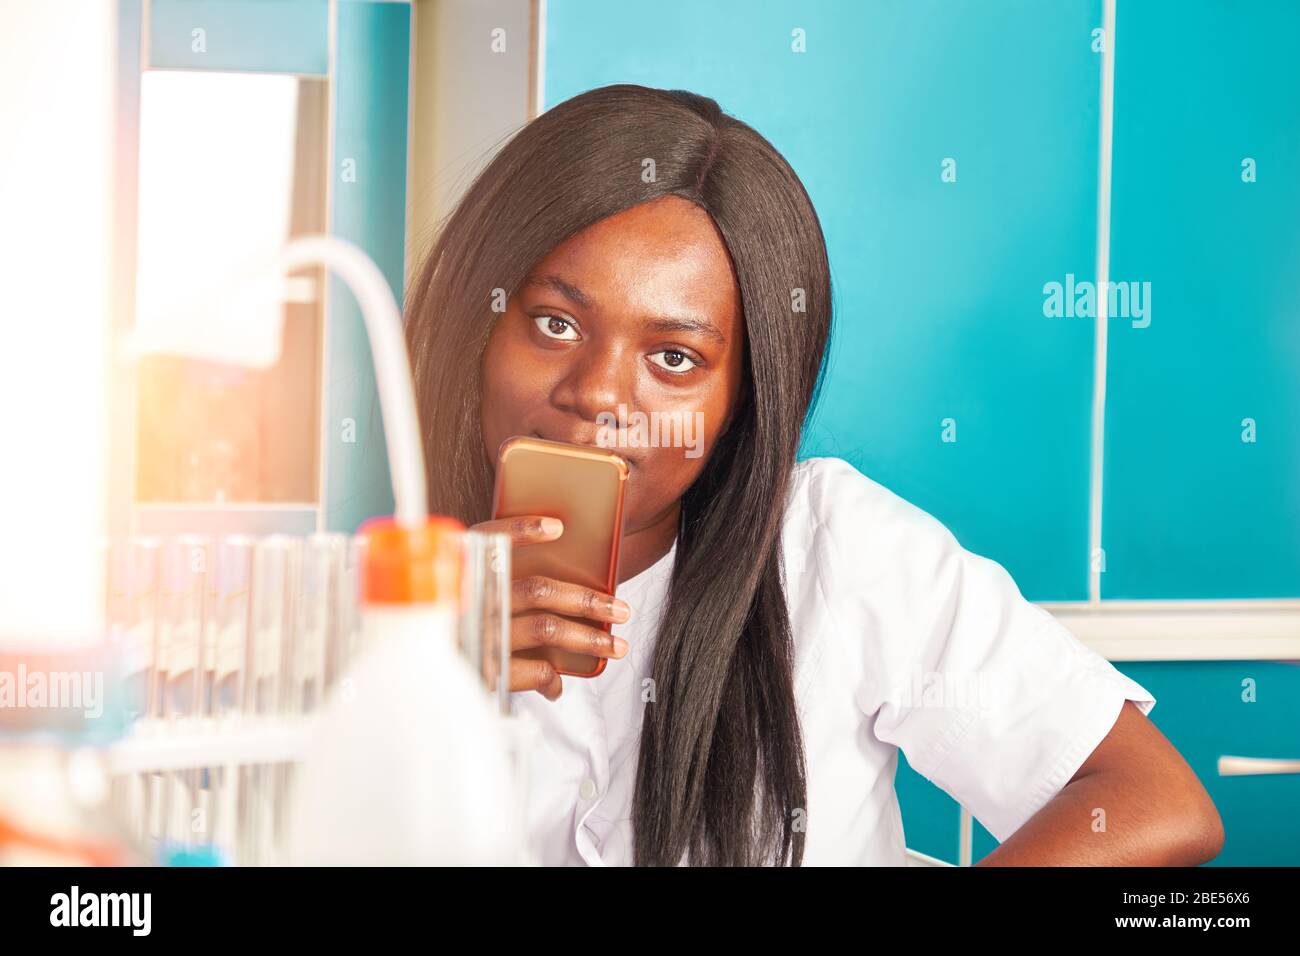 Young smiling African female scientist, graduate or medical student with mobile phone looks at the camera. The woman smiles while using digital device Stock Photo